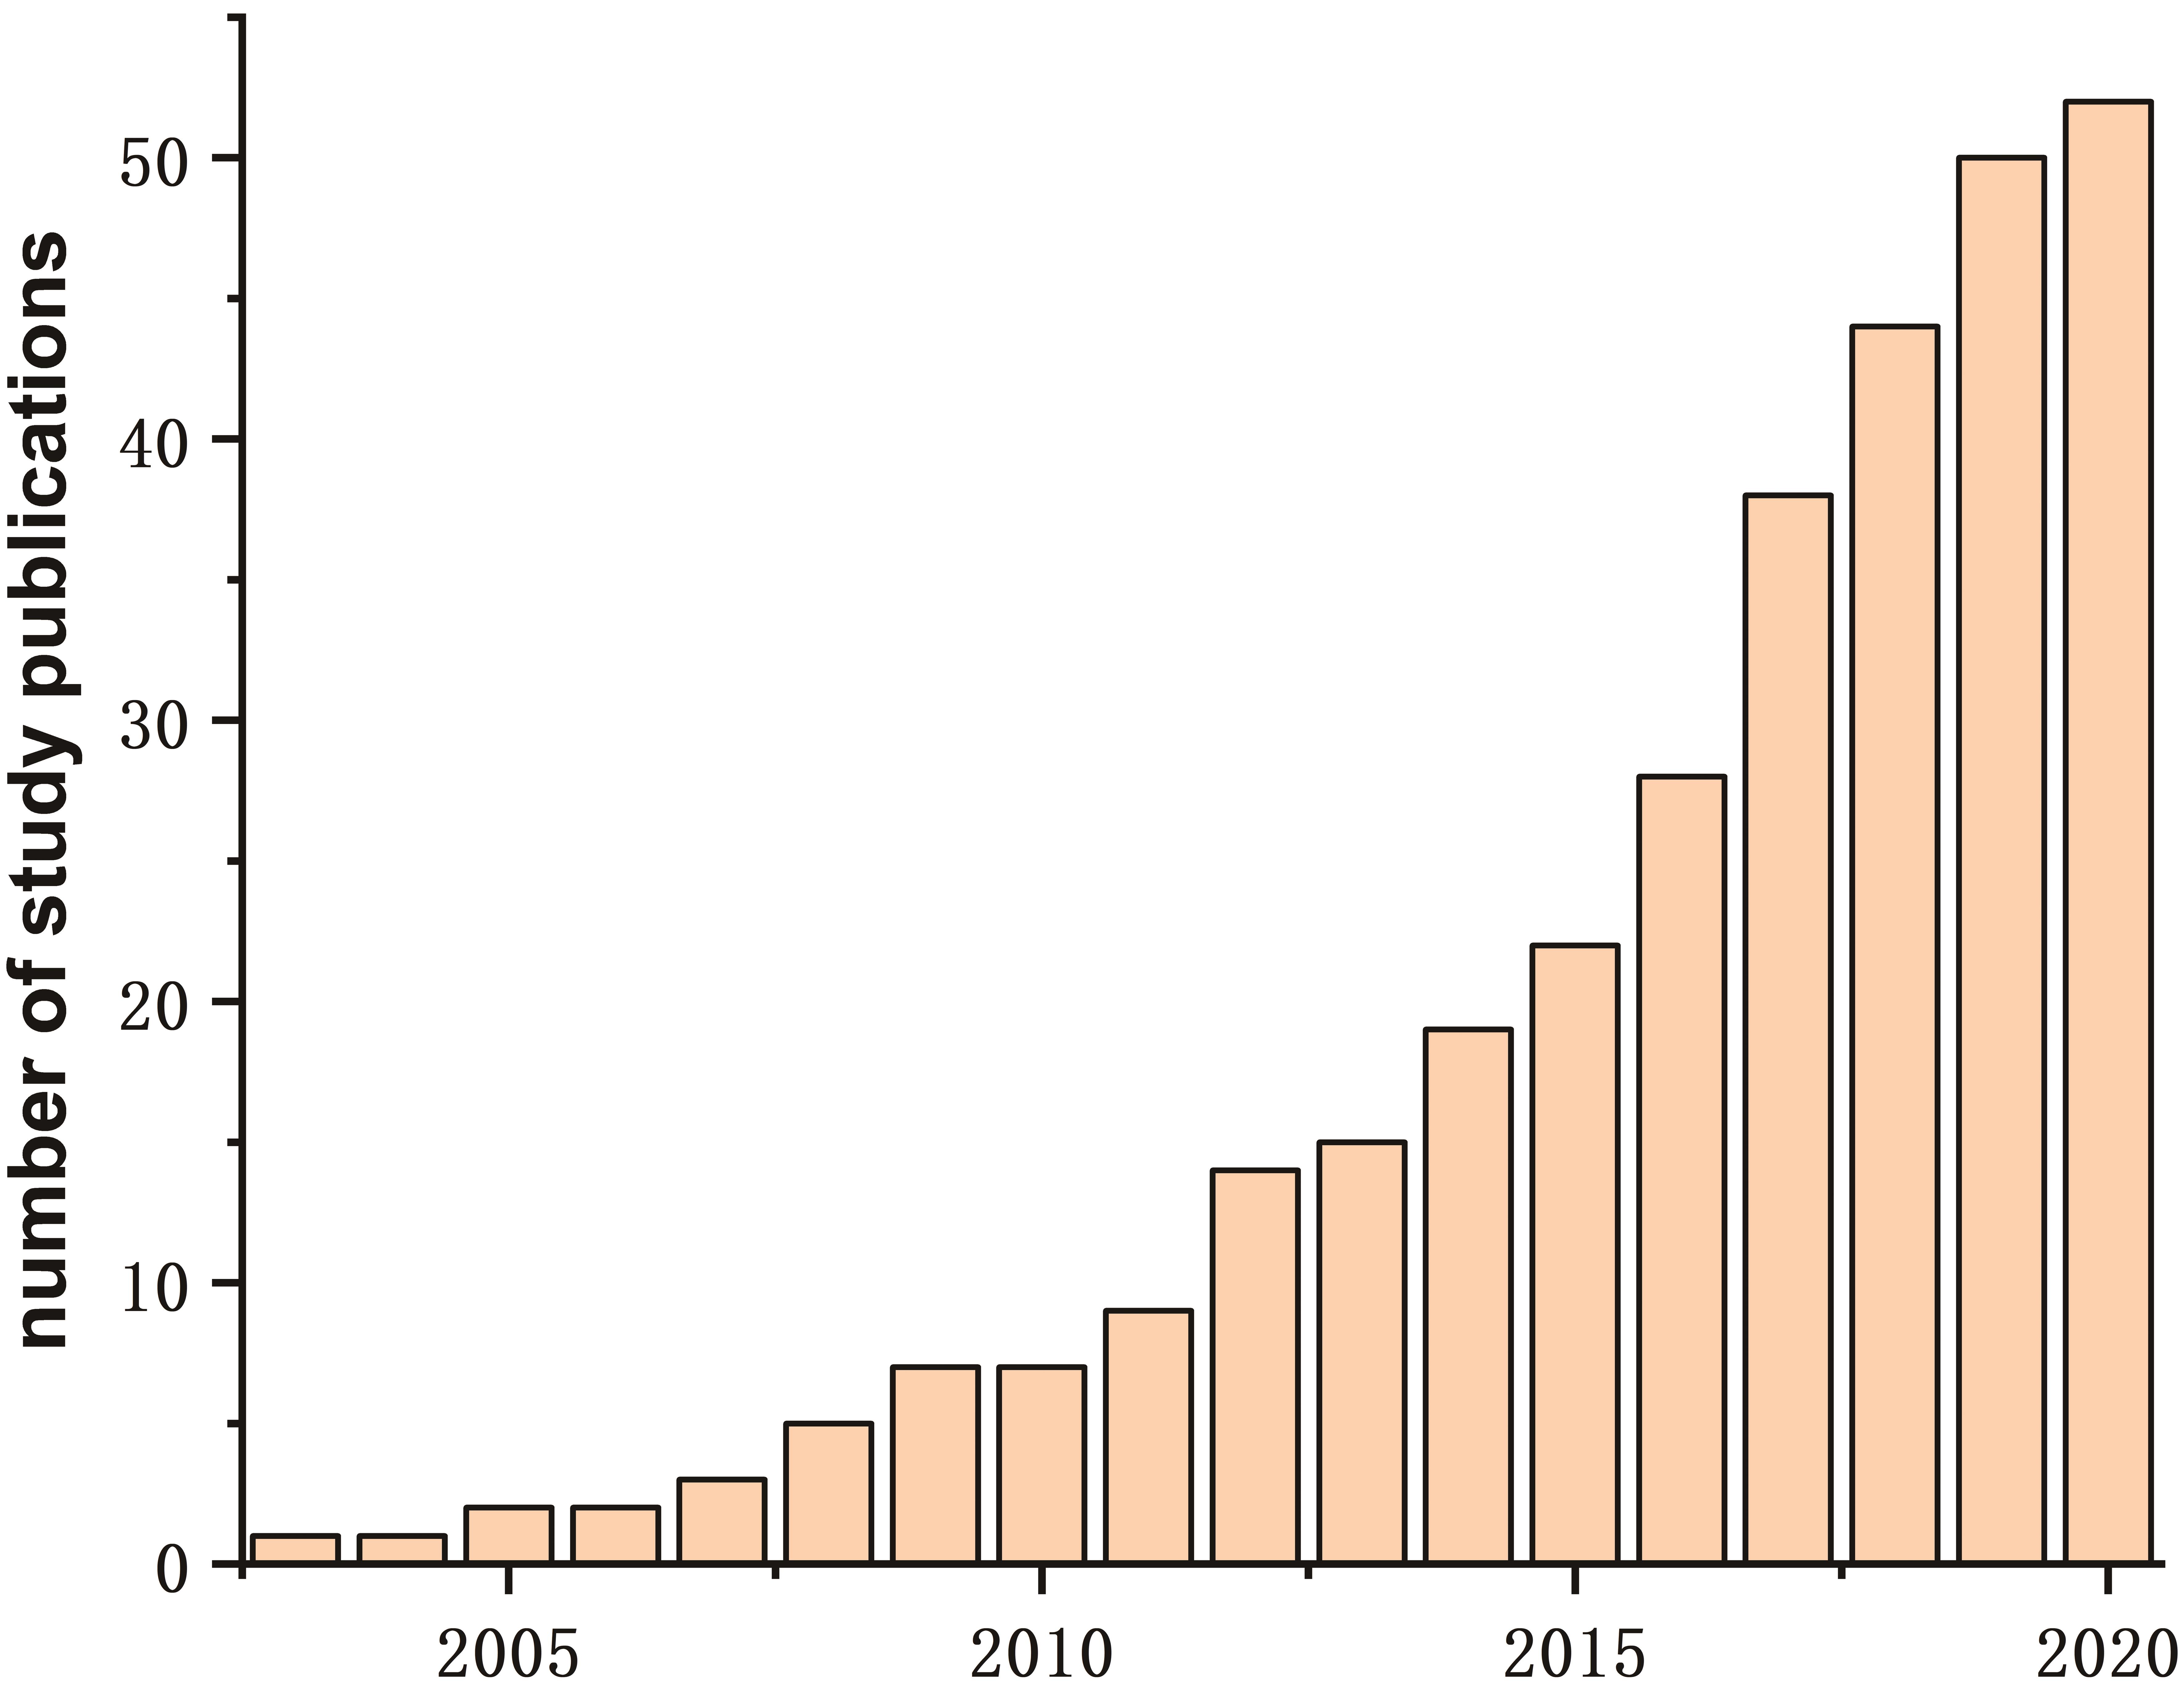 Cumulative growth in relevant publications on PubMed by April 14, 2020.